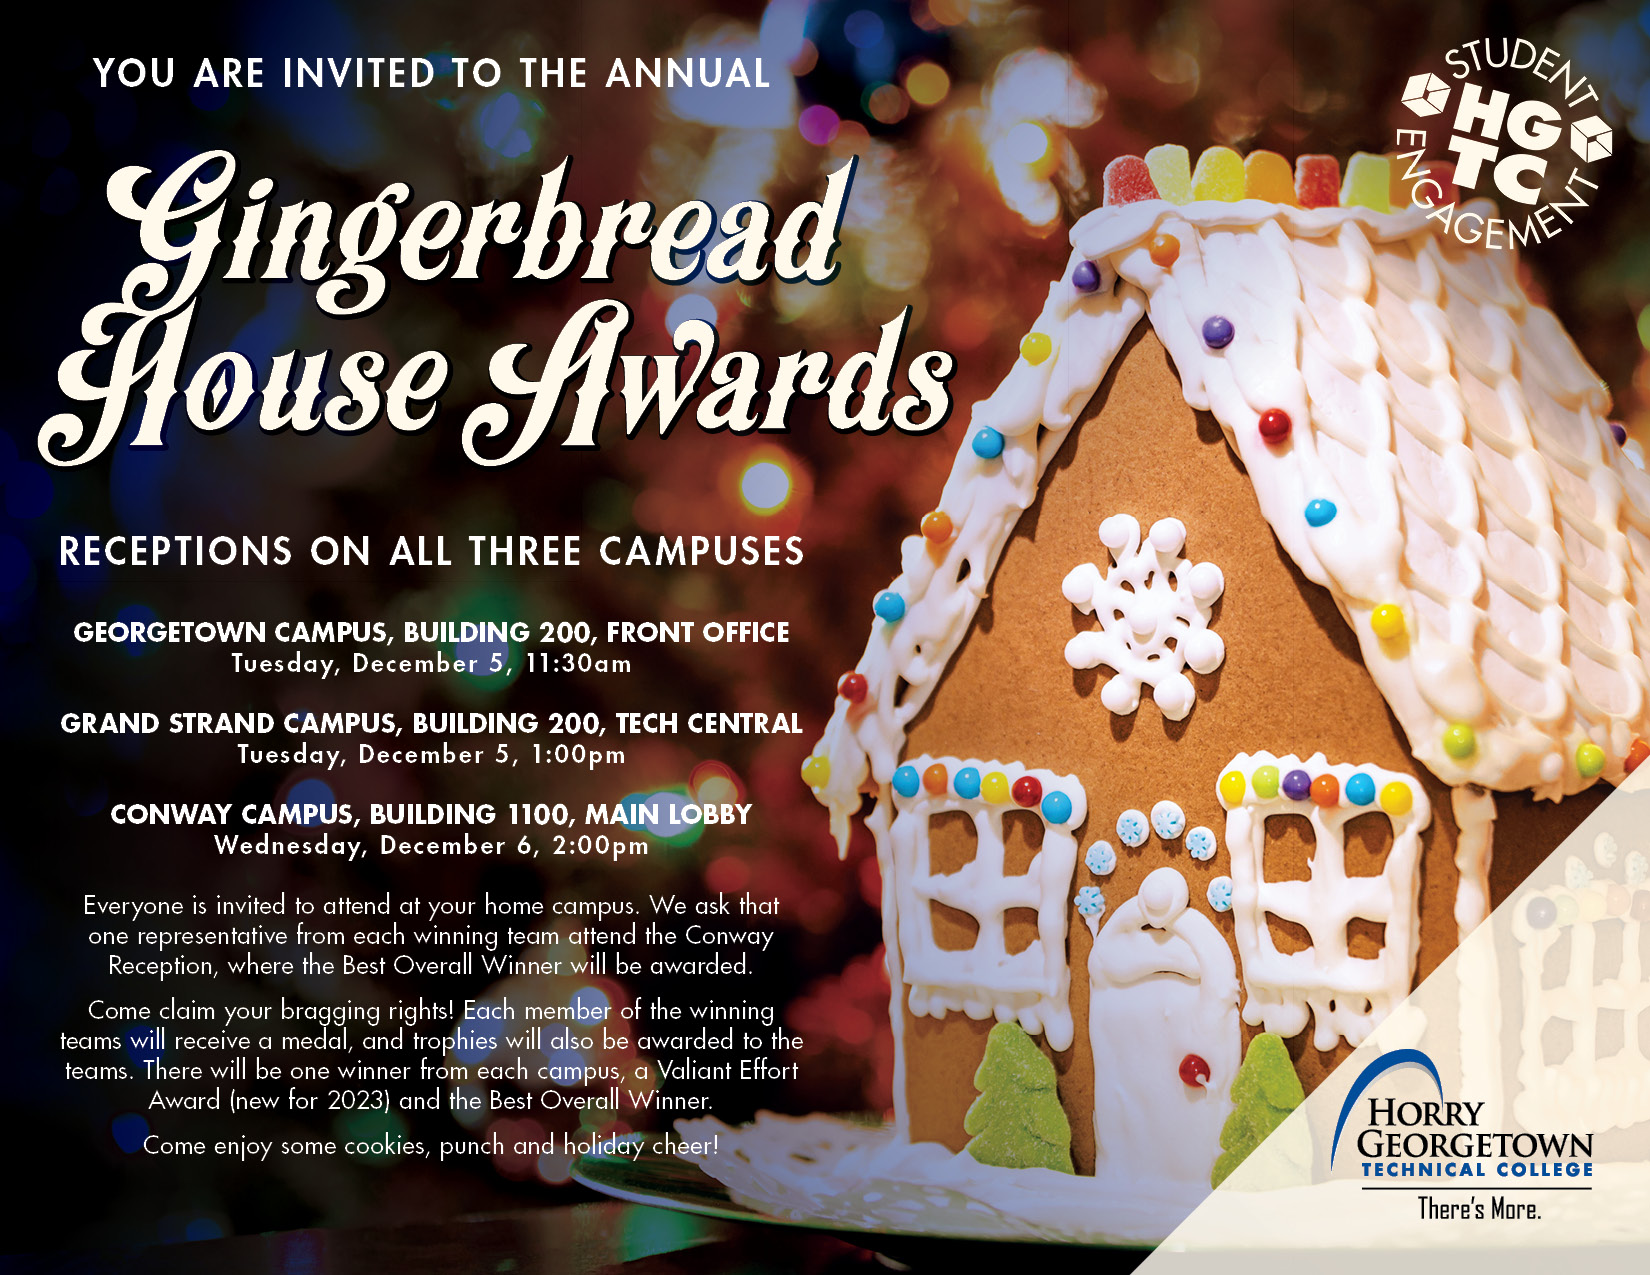 Gingerbread House Awards